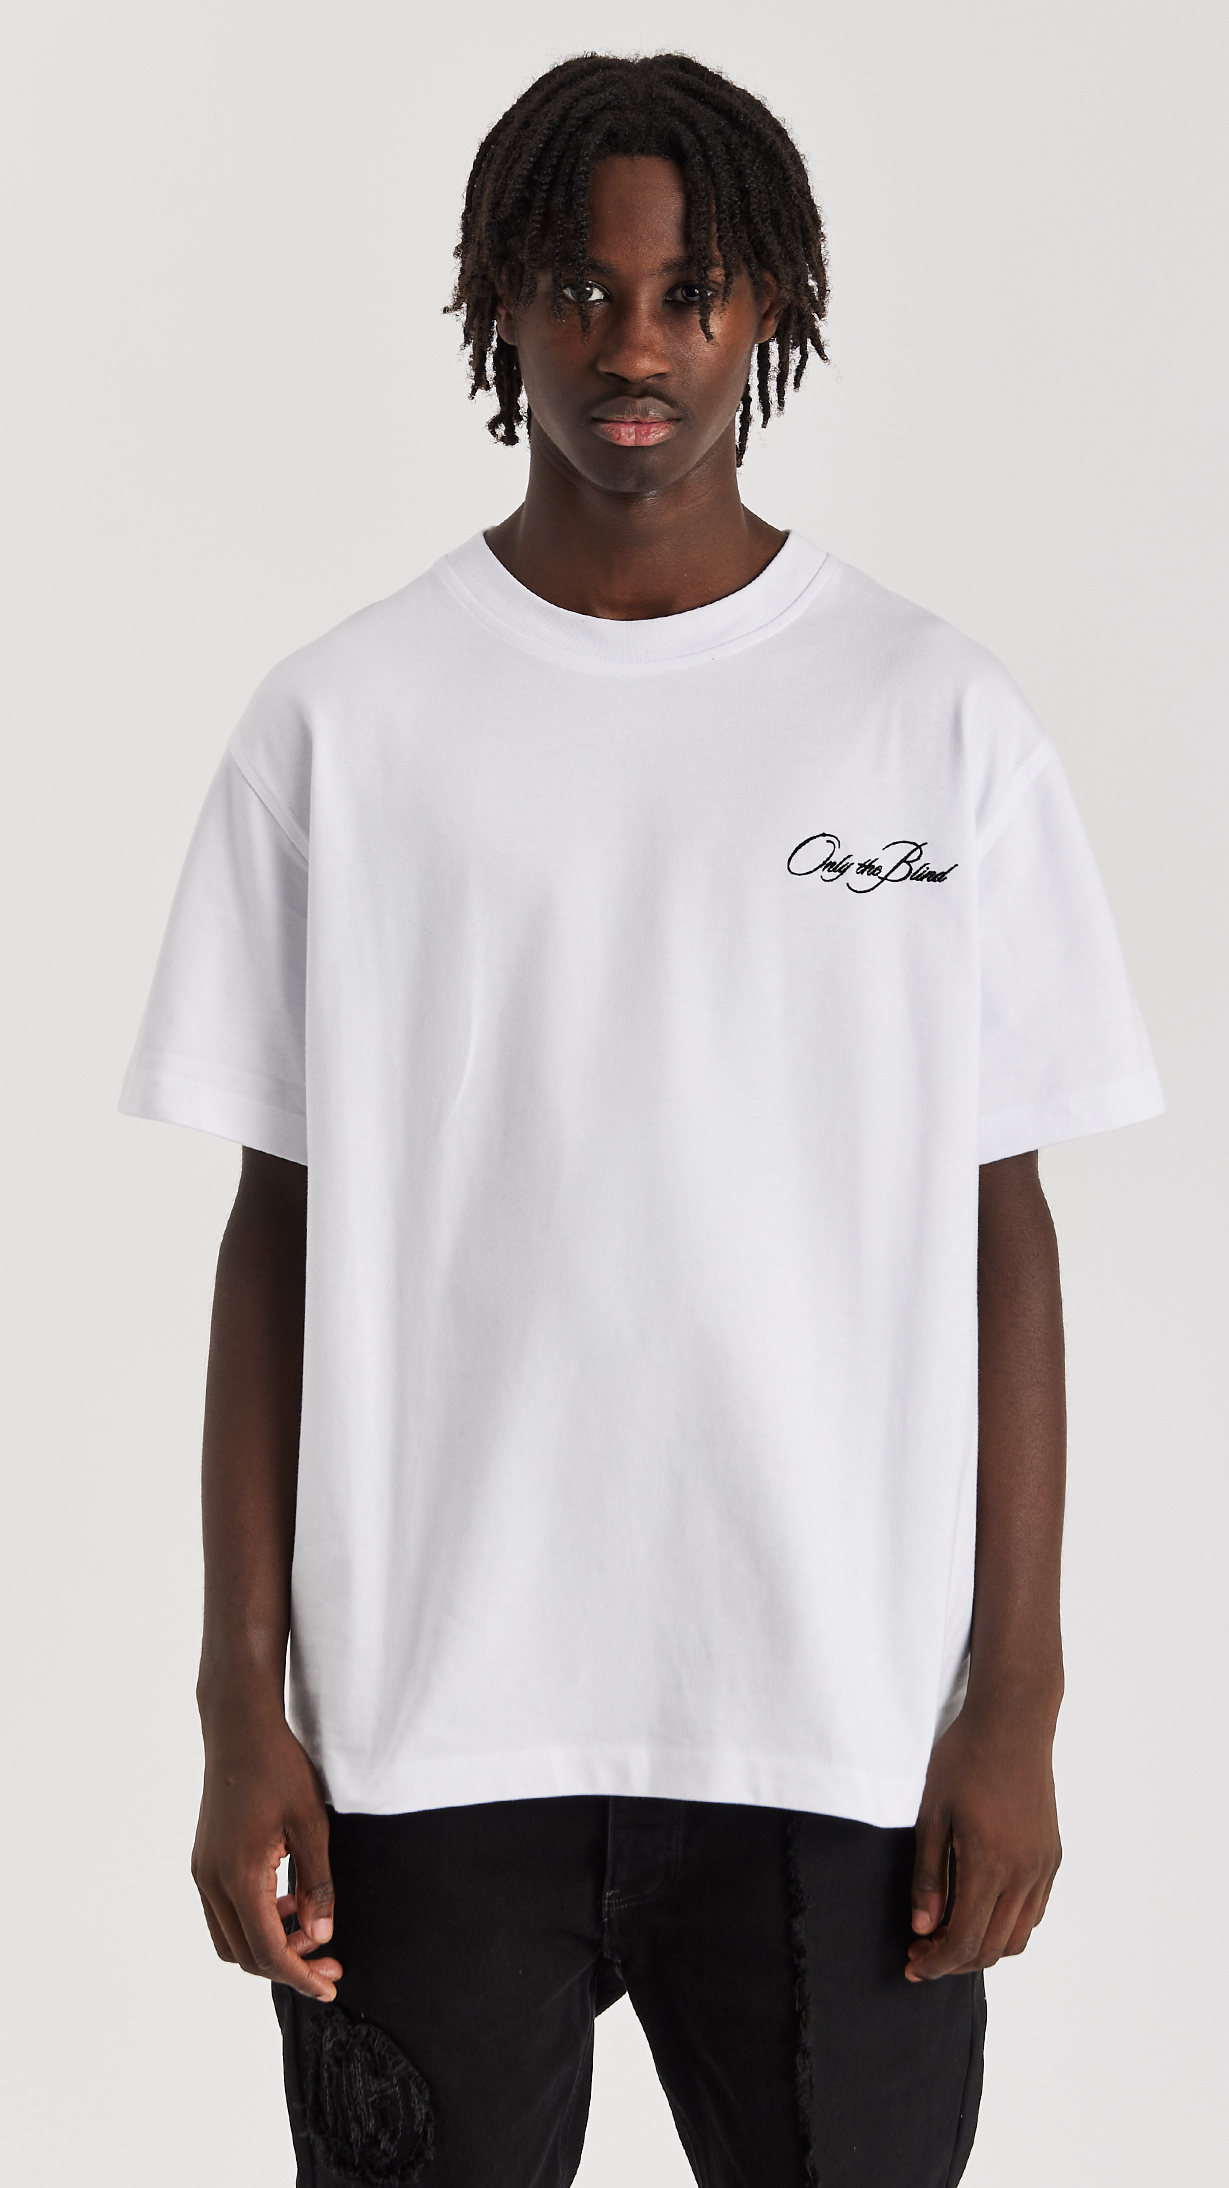 ONLY THE BLIND - Frozen White Essential T-Shirt